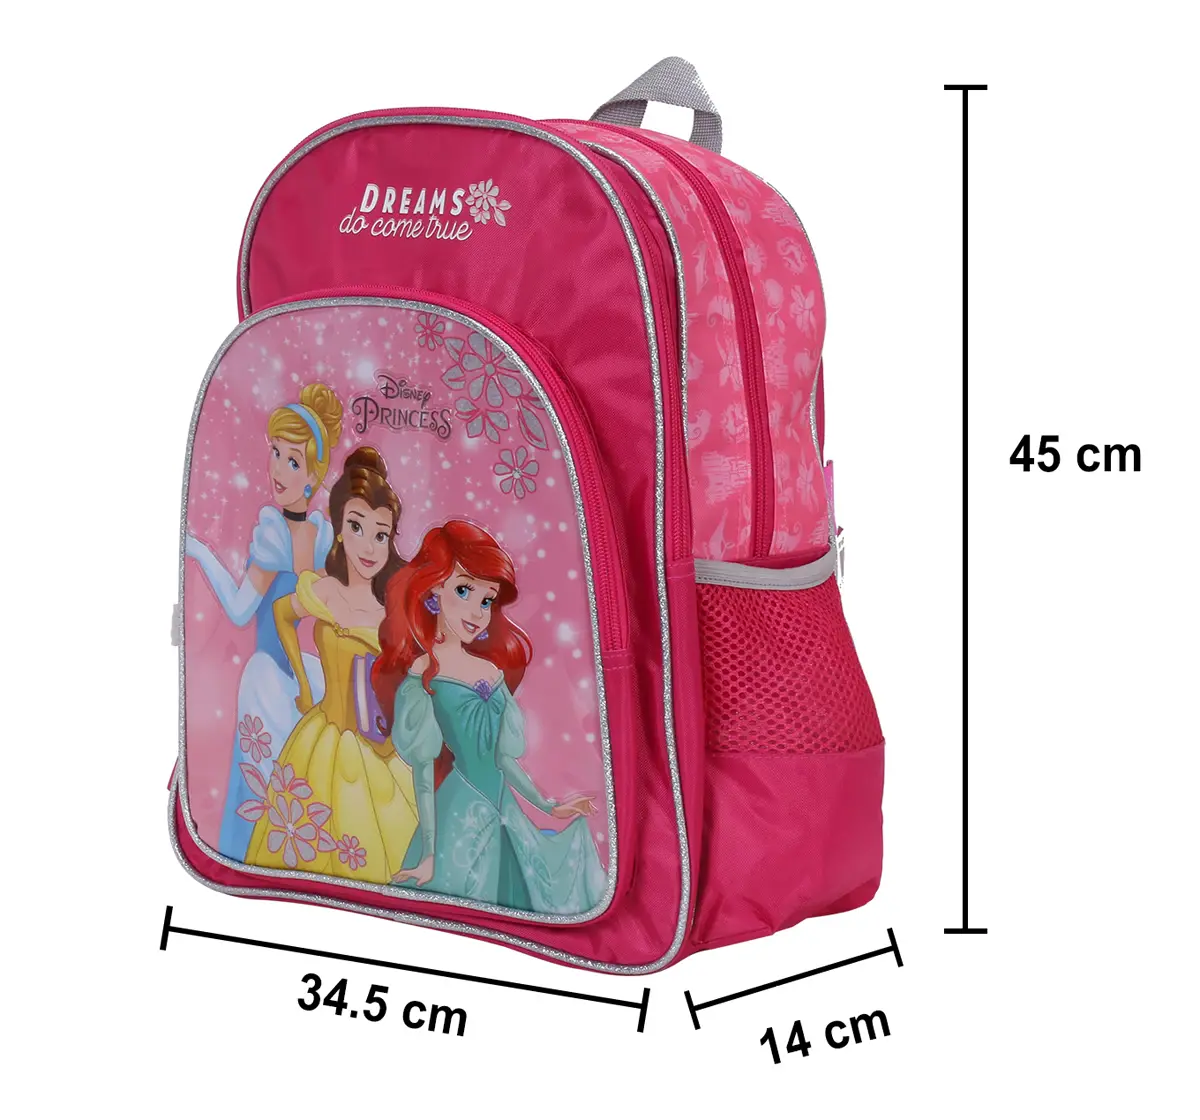 Simba Princess Find Your Fate 18 Backpack Multicolor 3Y+